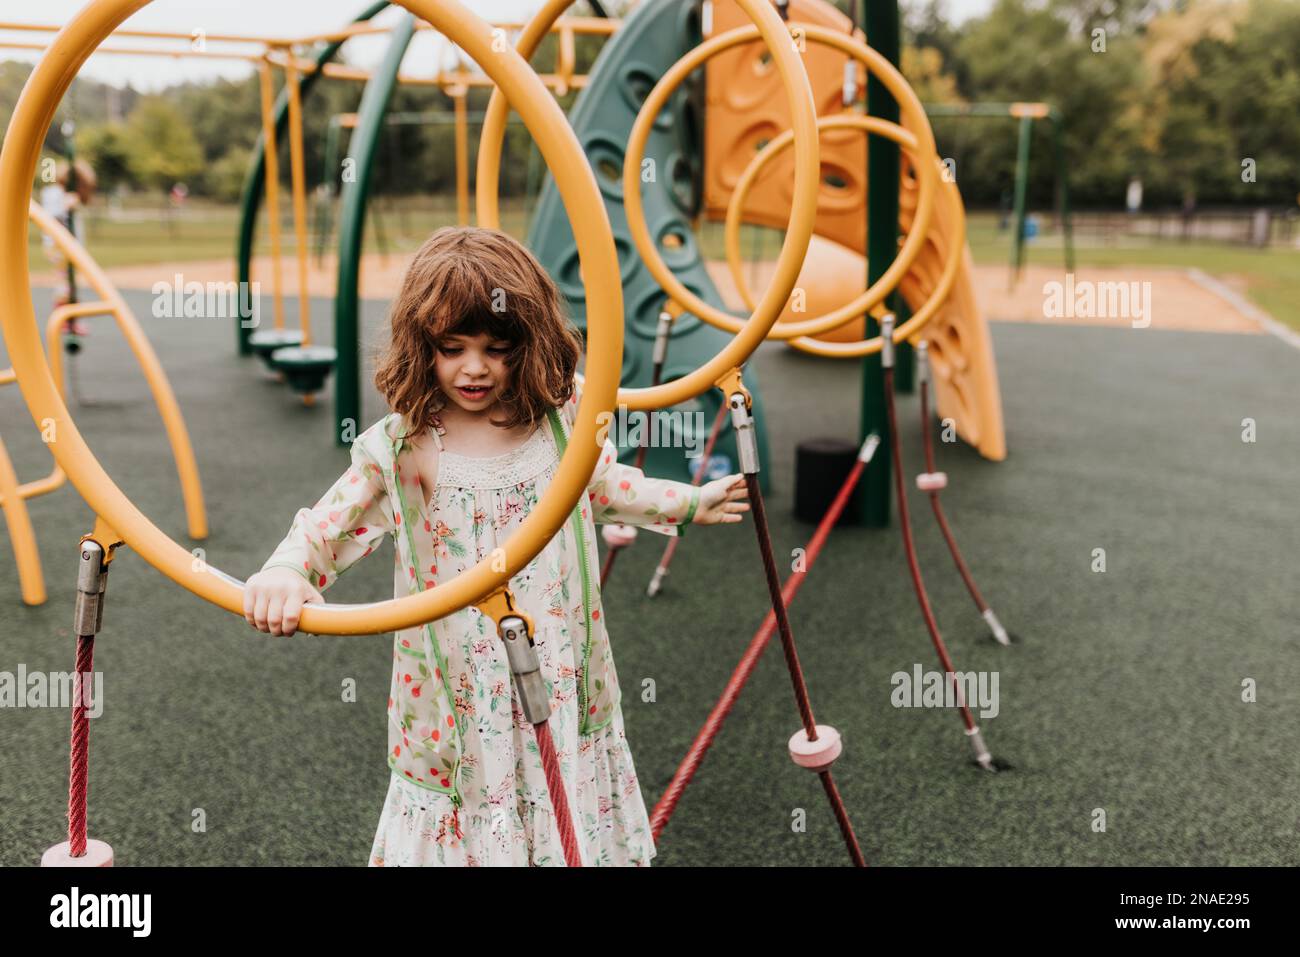 Young girl plays on playground equipment at park on cloudy day Stock Photo